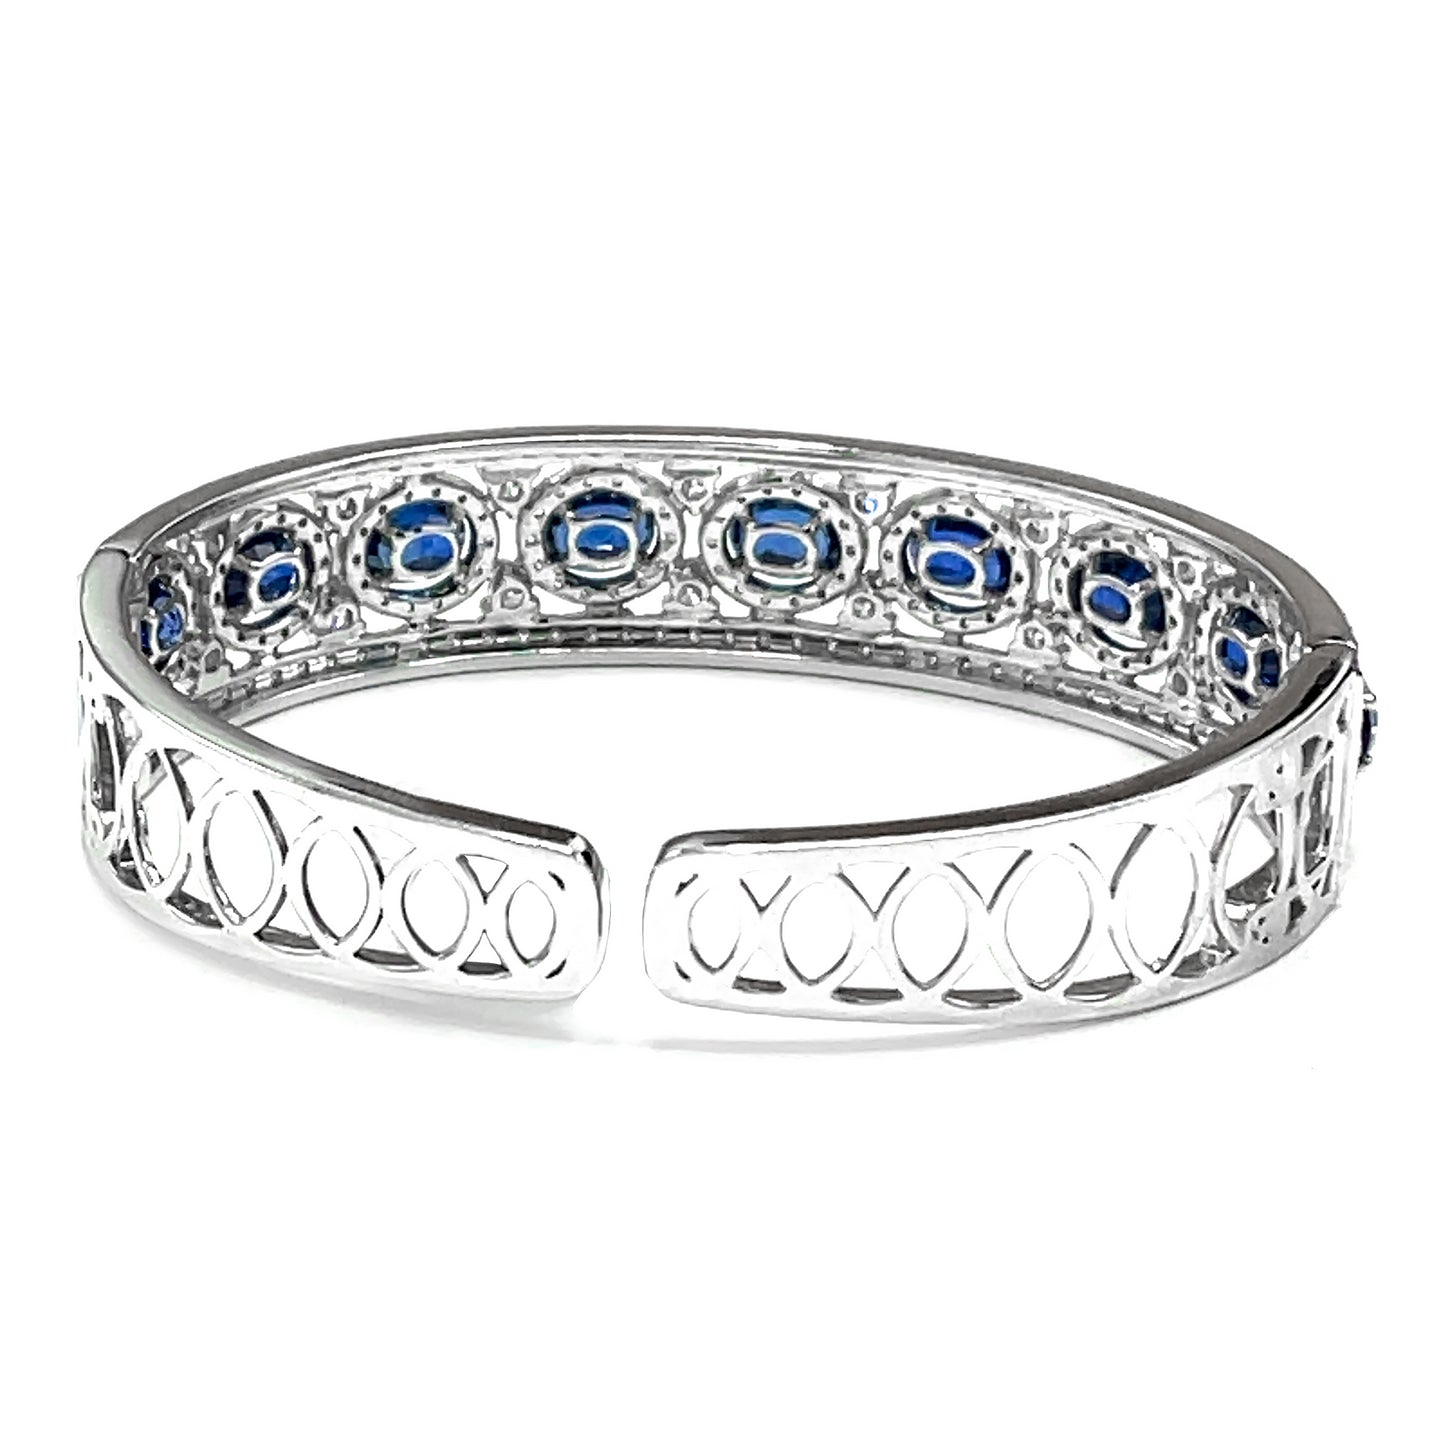 Load image into Gallery viewer, 18k kt White Gold Sapphire and Diamond Bangle Bracelet
